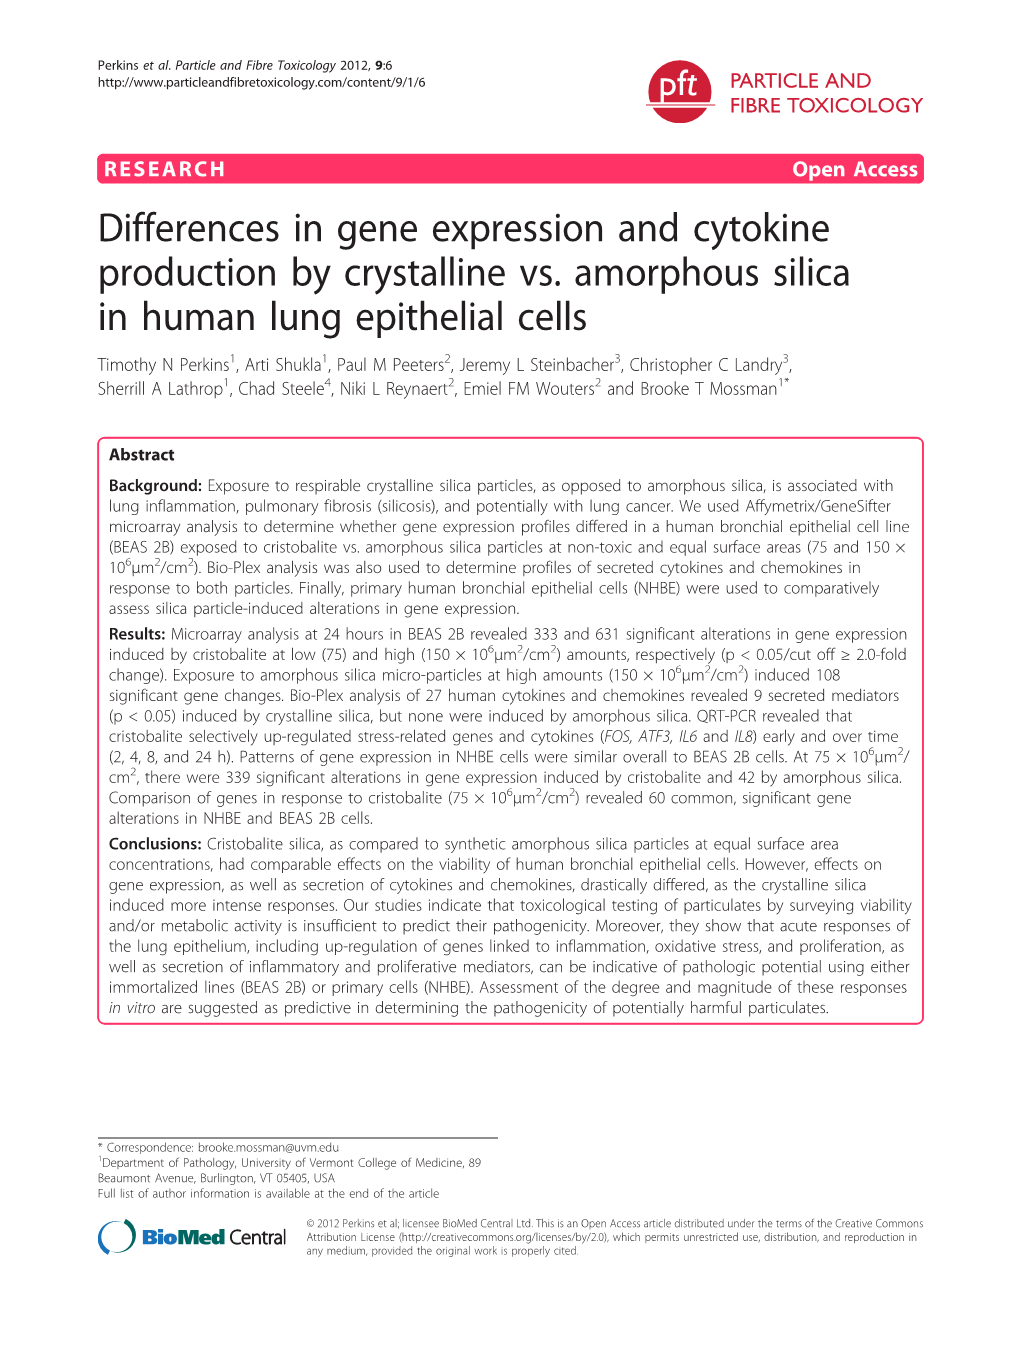 Differences in Gene Expression and Cytokine Production by Crystalline Vs. Amorphous Silica in Human Lung Epithelial Cells